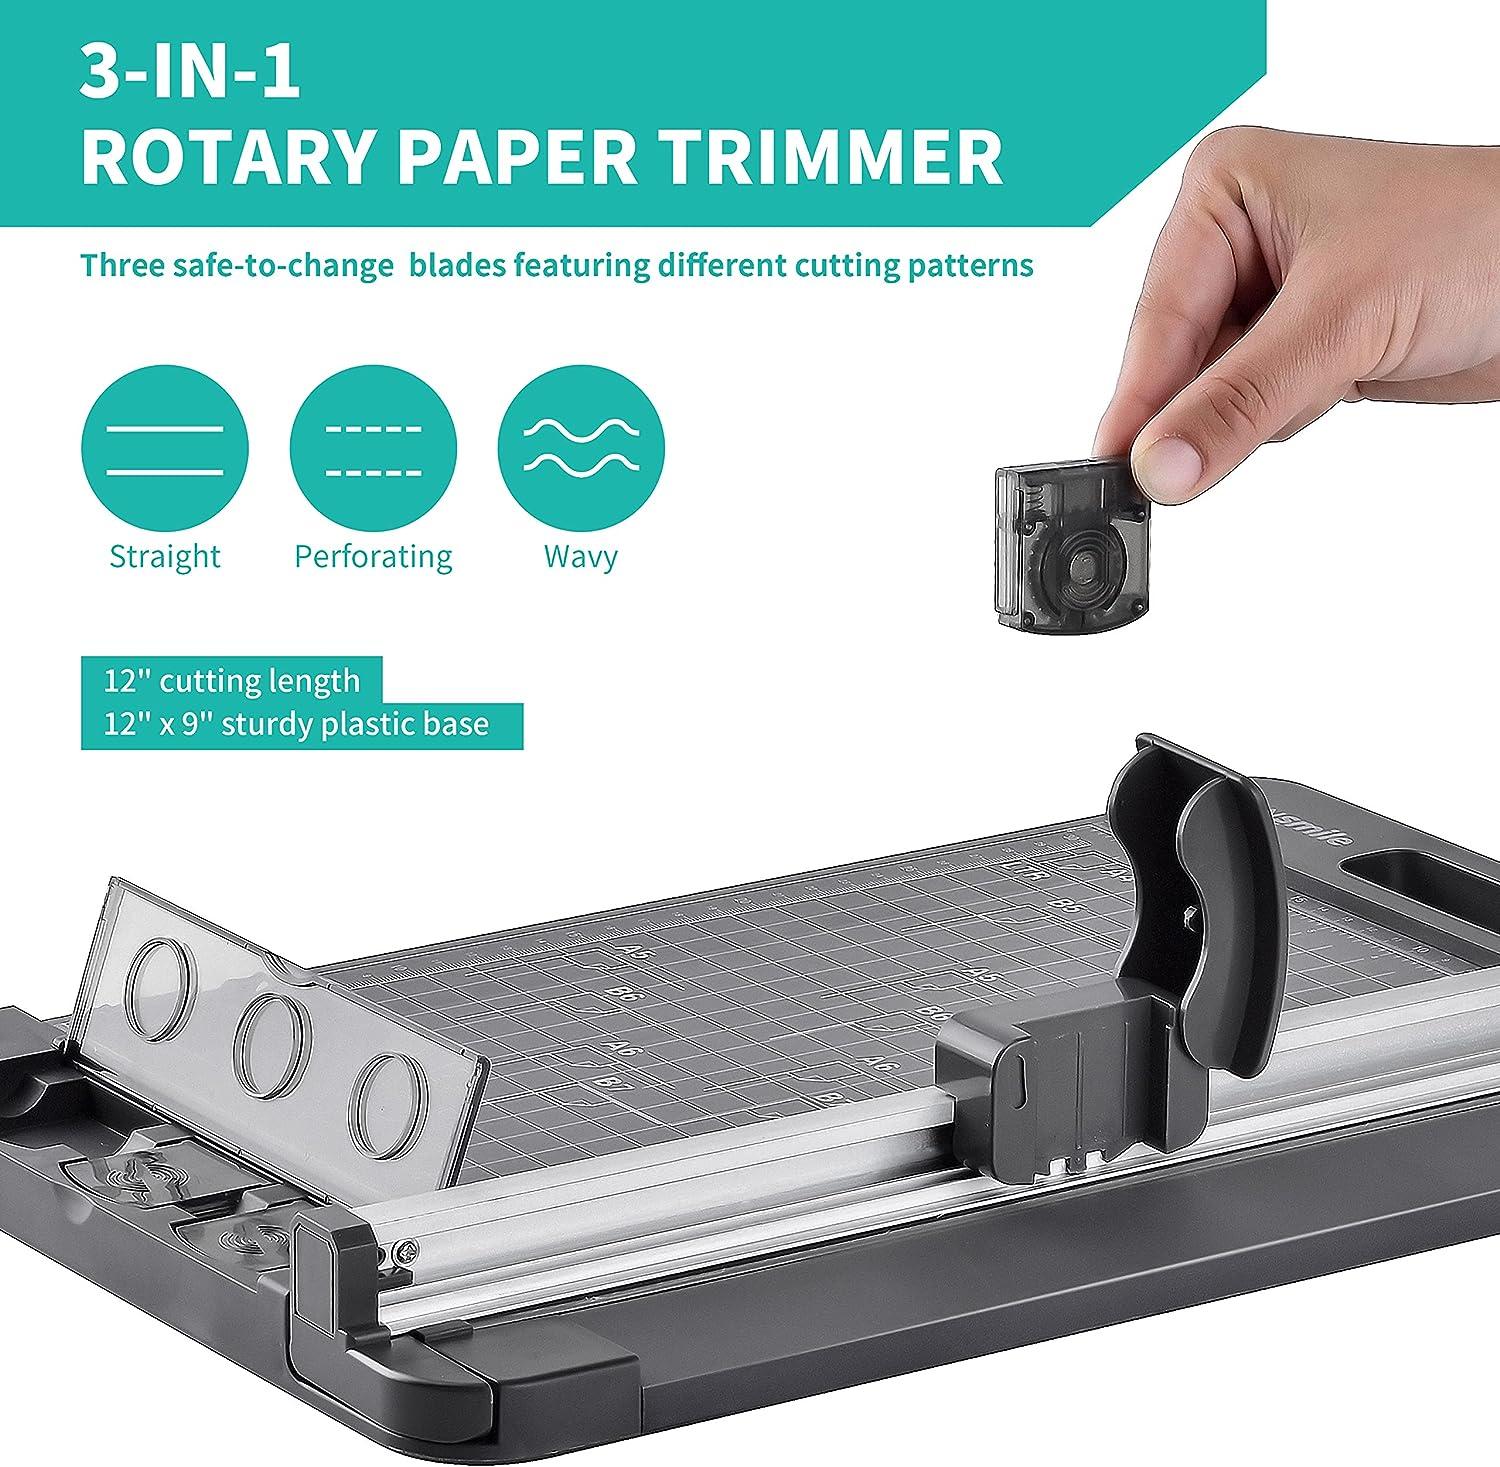 Rotary Paper Trimmer, 3-in-1 Paper Cutter, 12 inch Cutting Length, with Straight Cut/Perforating Cut/Wavy Cut, Enclosed Blades for Safe Use, Ideal